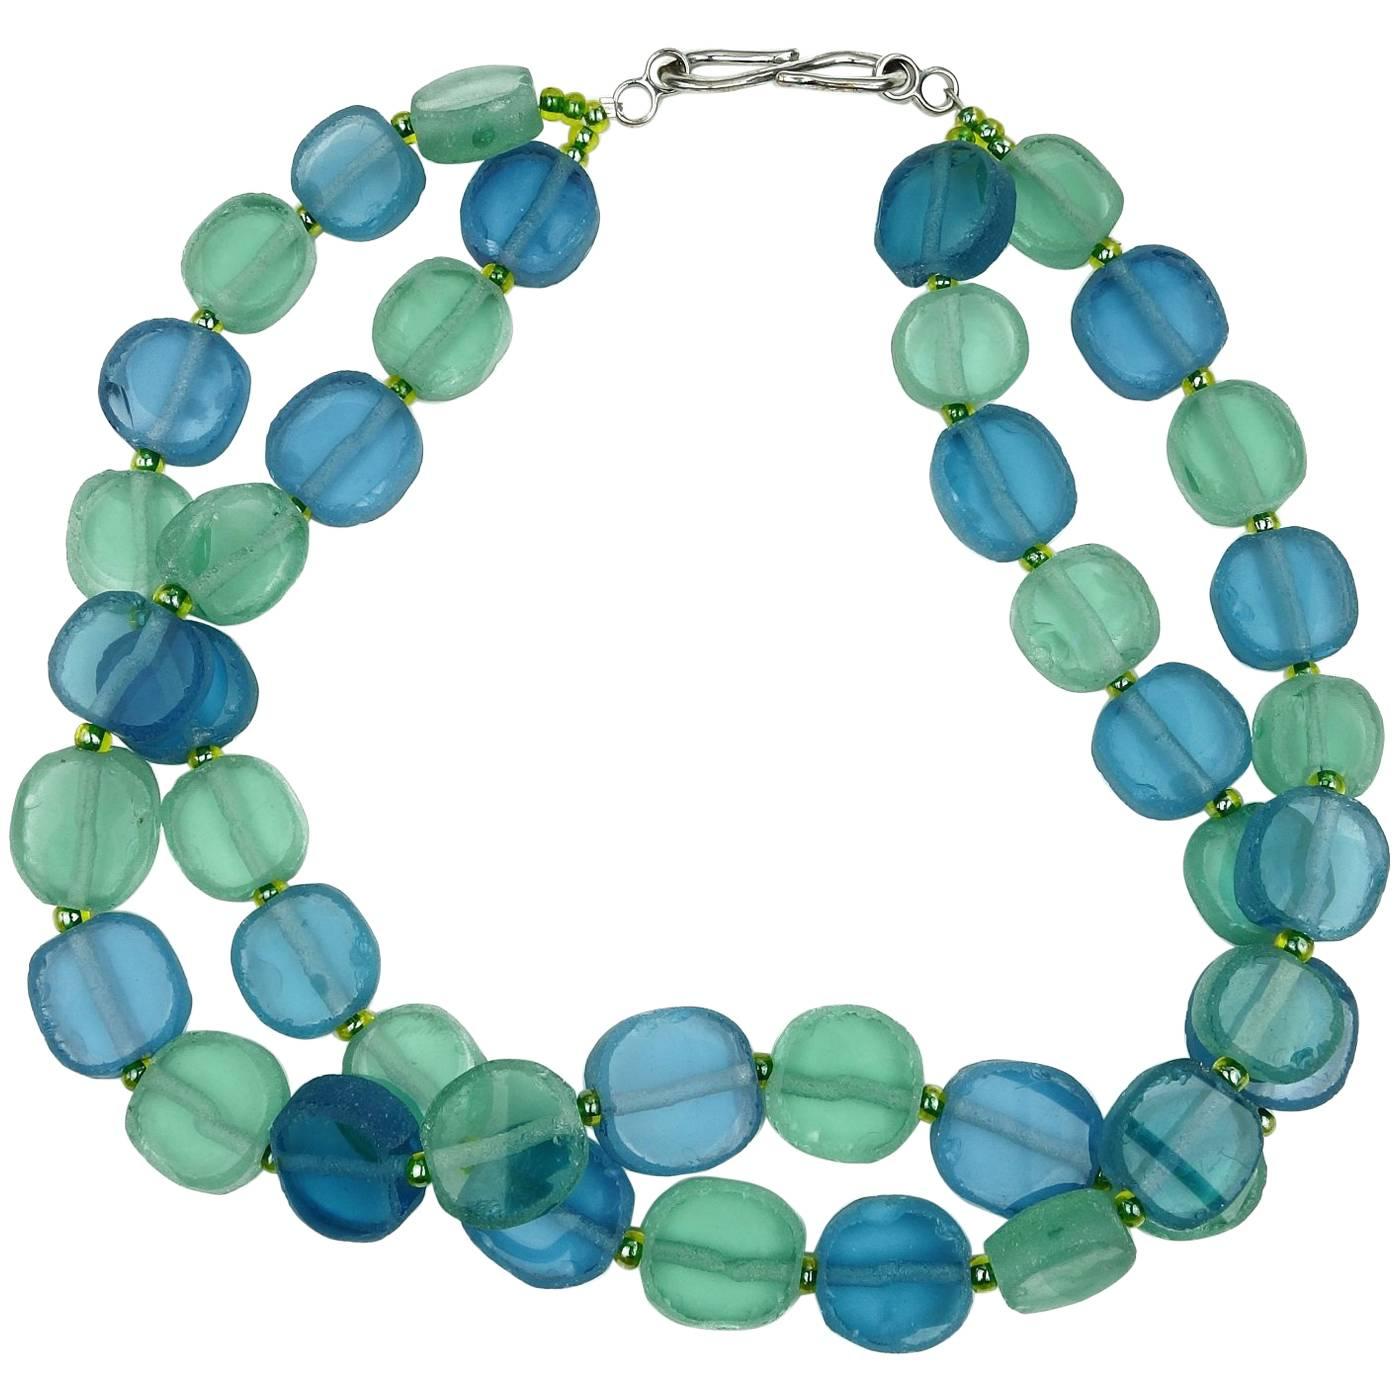 Double Strand Necklace of Blue and Green Sea Glass